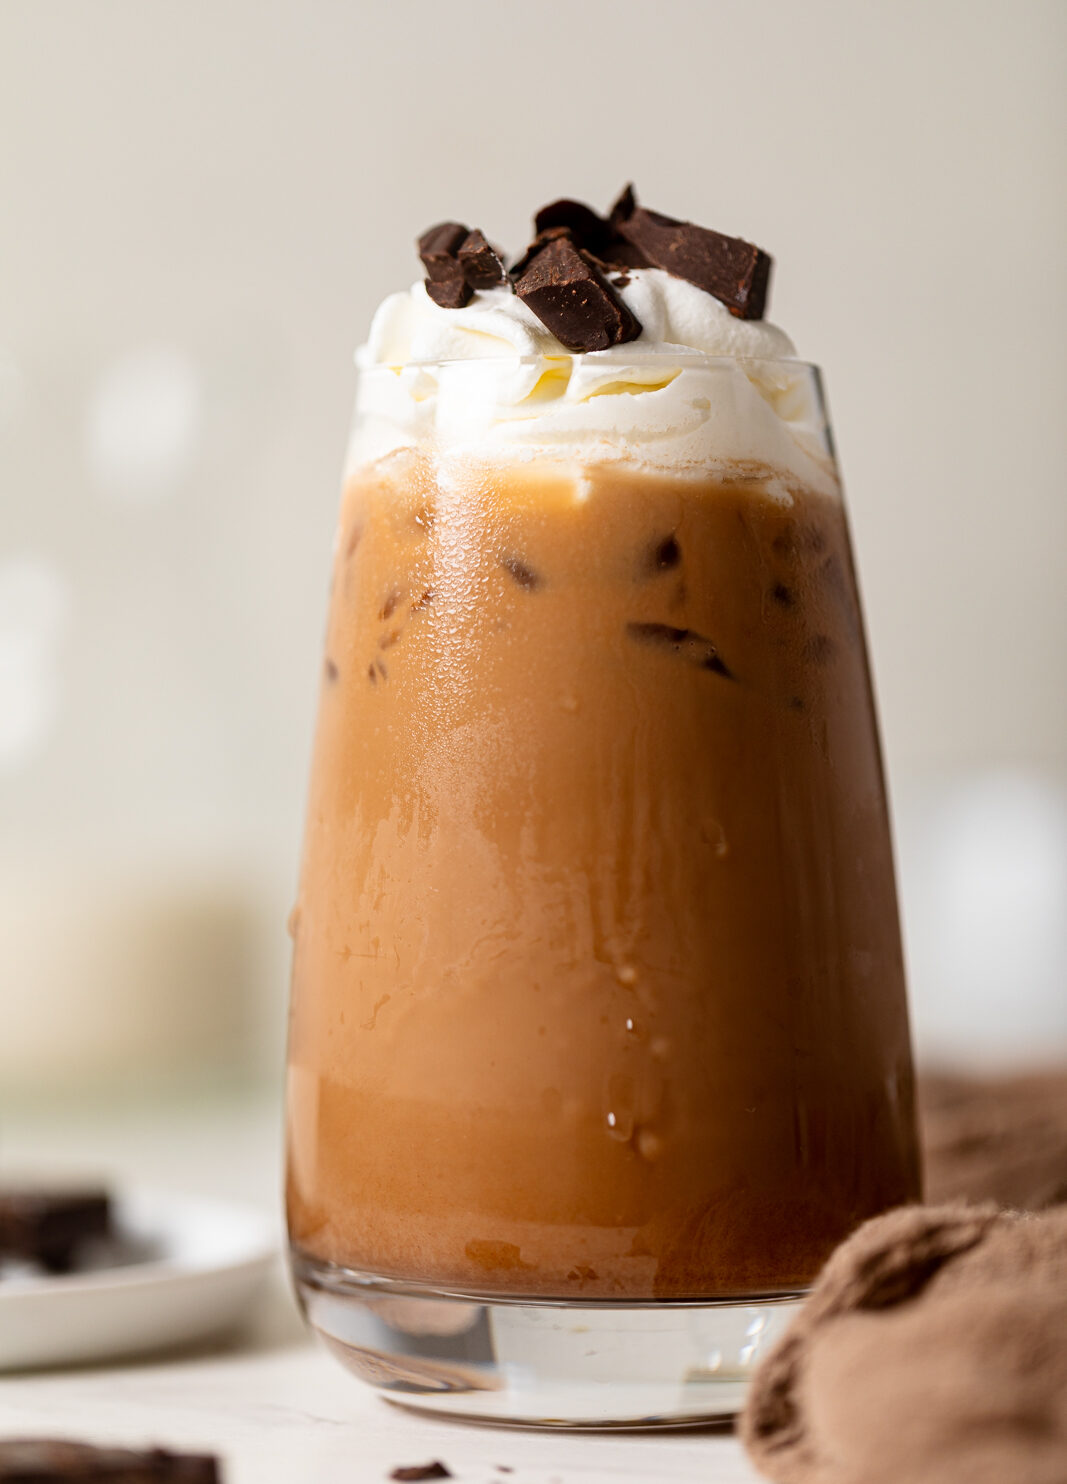 https://www.orchidsandsweettea.com/wp-content/uploads/2022/03/Chocolate-Iced-Latte-3-of-6-e1647455475532.jpg